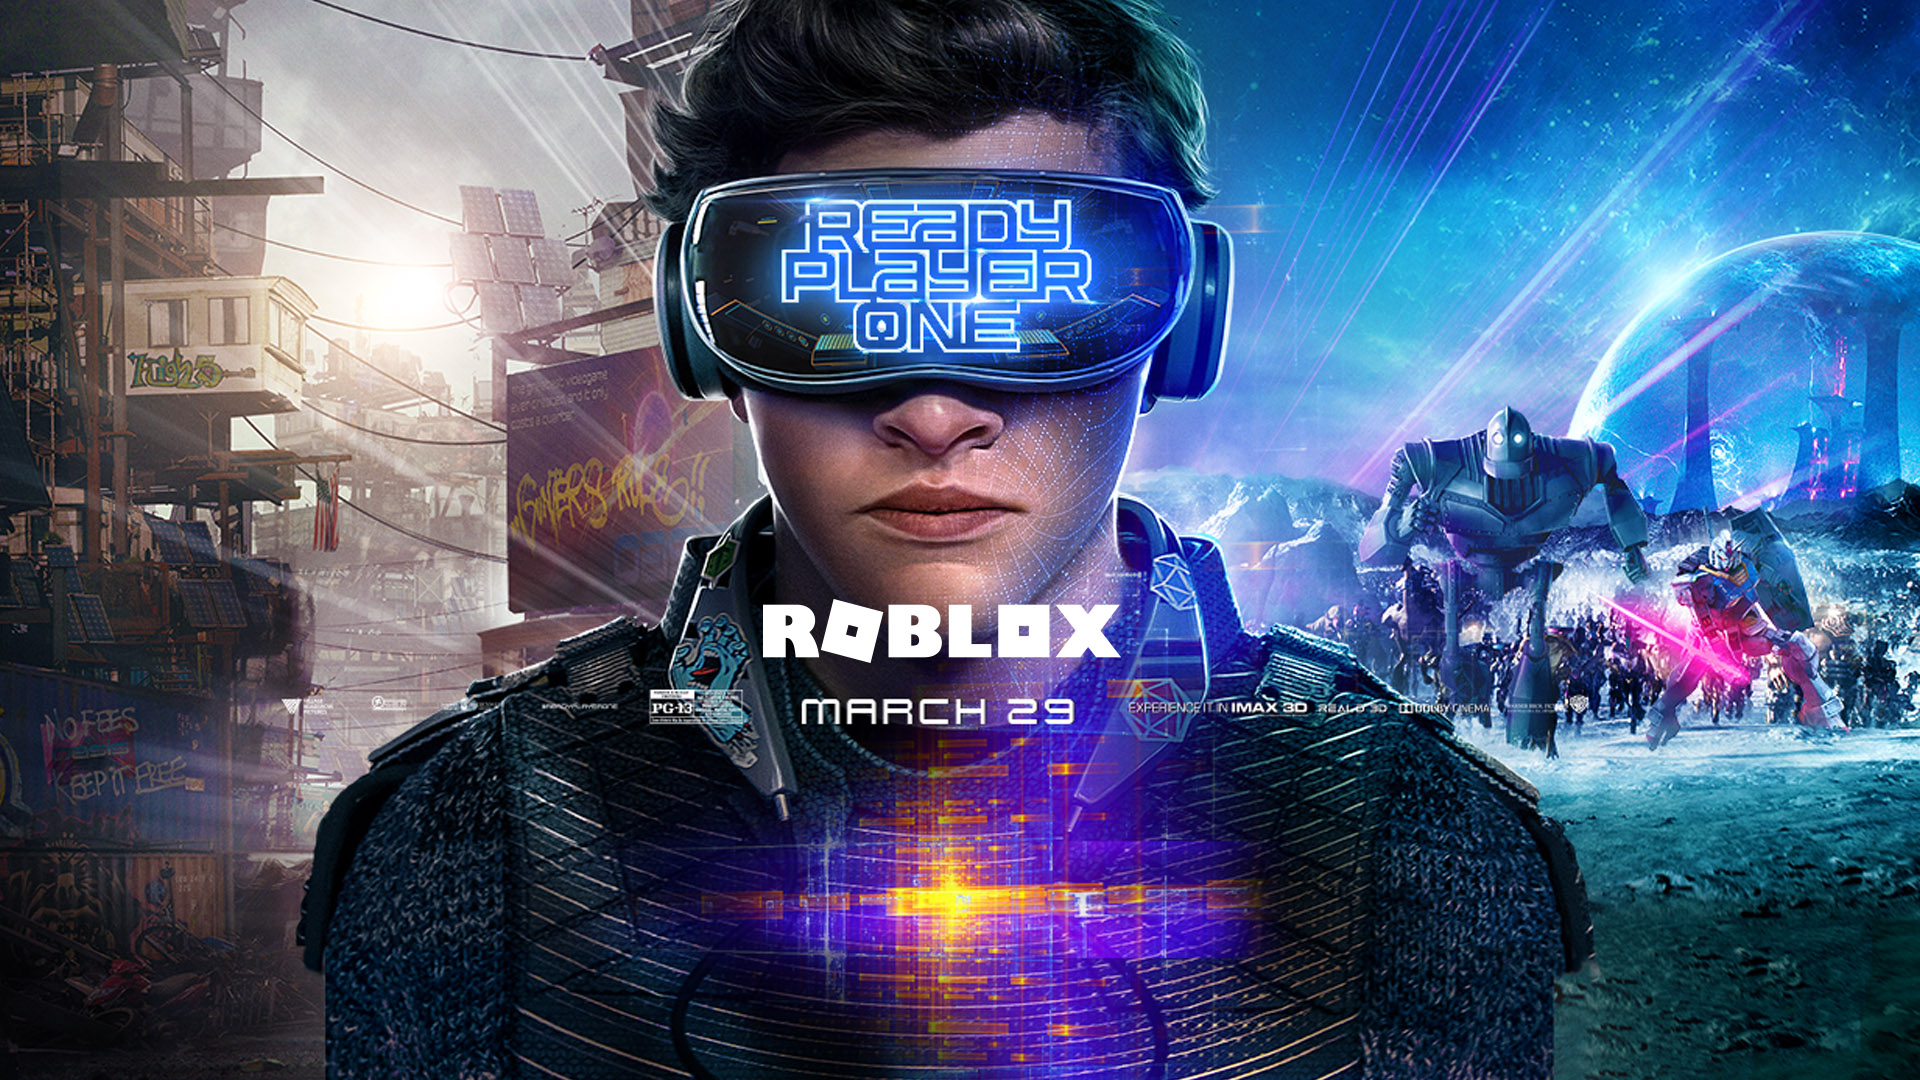 A Look Inside the Roblox Ready Player One Adventure (So Far